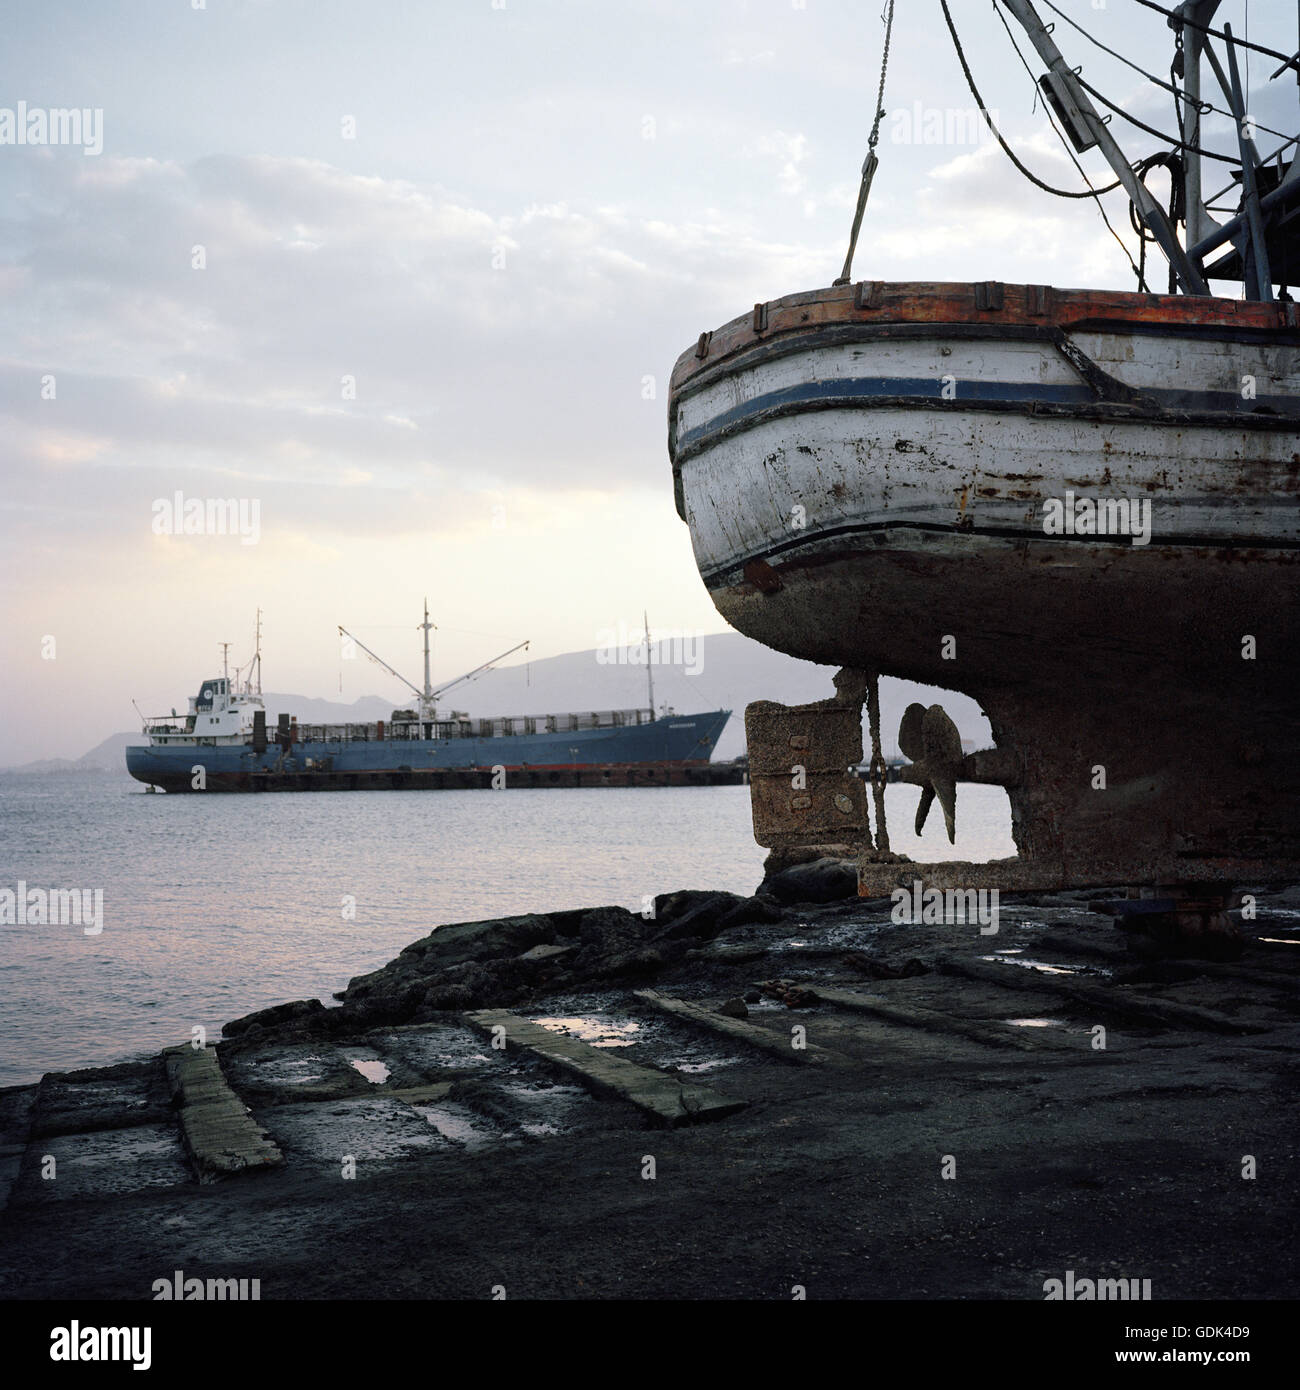 Ships of all sizes await repair in the dry docks and harbours south of the city of Suez. Stock Photo